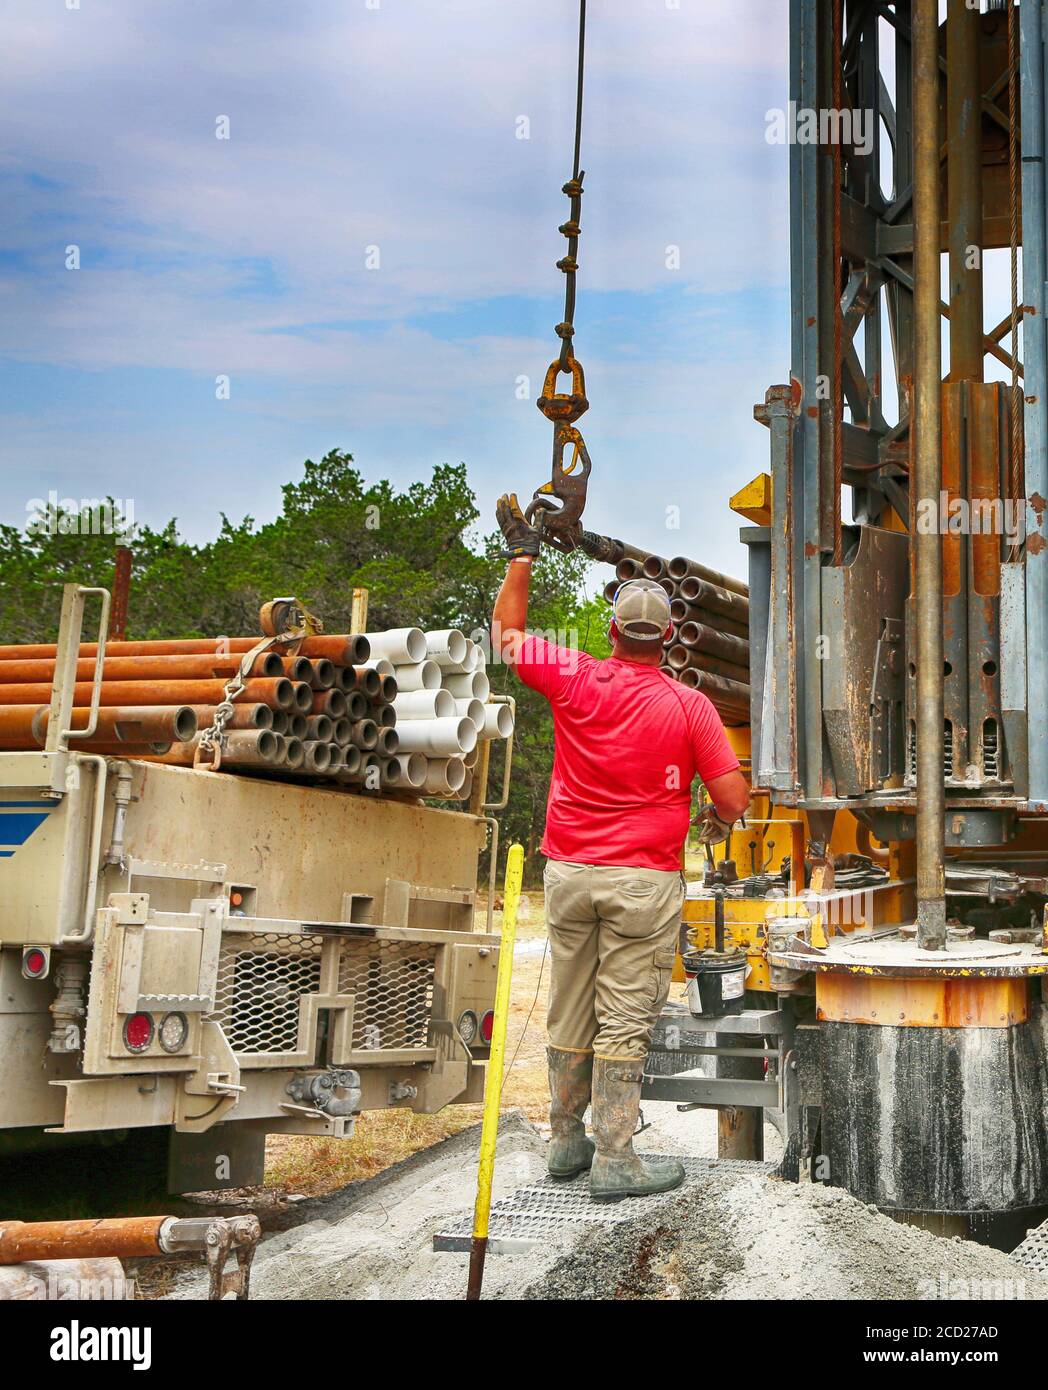 July 2, 2020. Burnet County, Texas. Drilling a water well on country land. Modern rotary drill rigs bore water well. Stock Photo